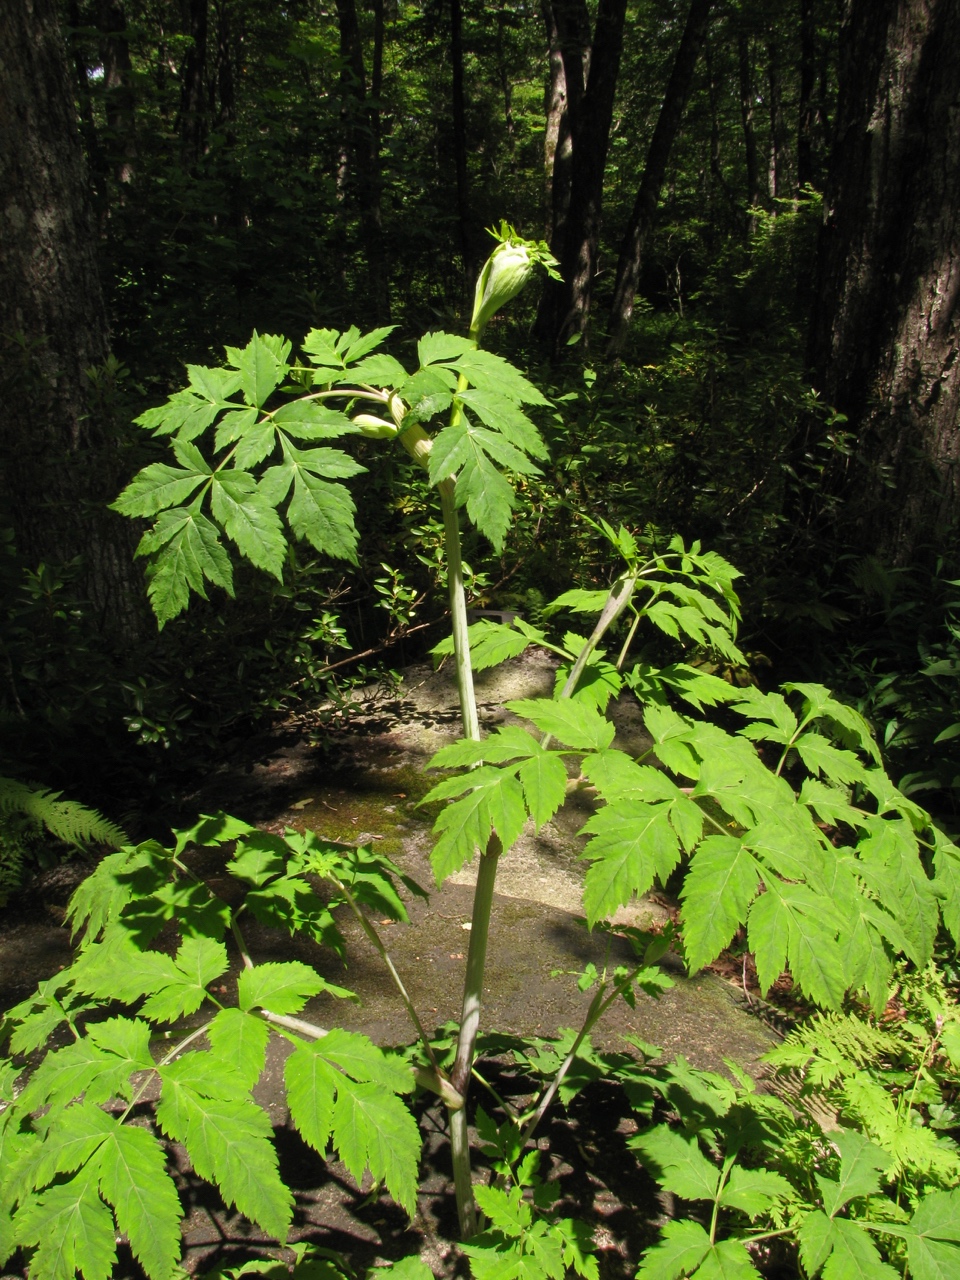 The Scientific Name is Angelica triquinata. You will likely hear them called Filmy Angelica, Mountain Angelica, Appalachian Angelica. This picture shows the Compound, alternate leaves of Angelica triquinata